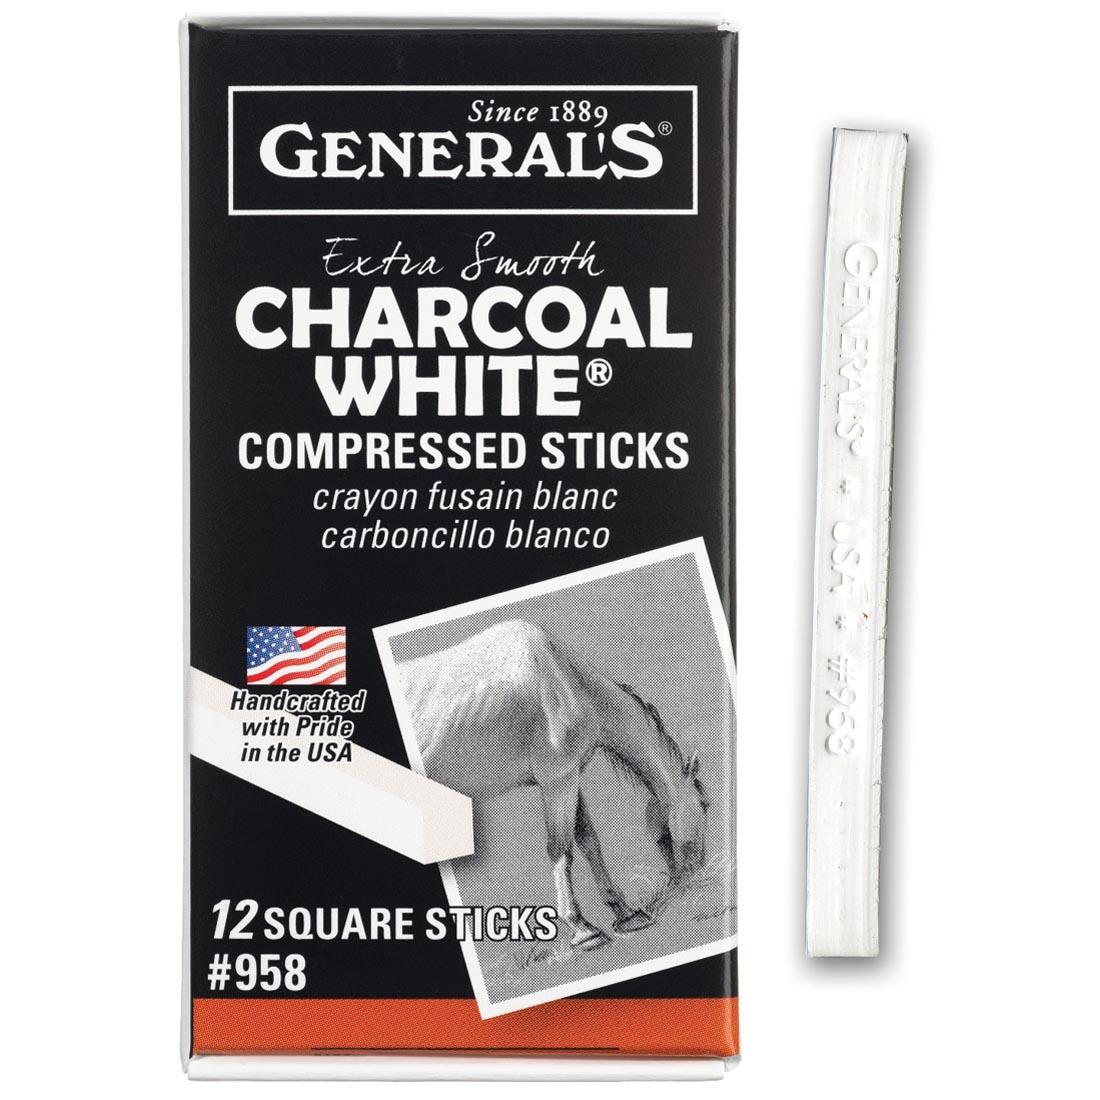 General's Charcoal White Compressed Sticks 12-Count Package with a single one shown outside the box